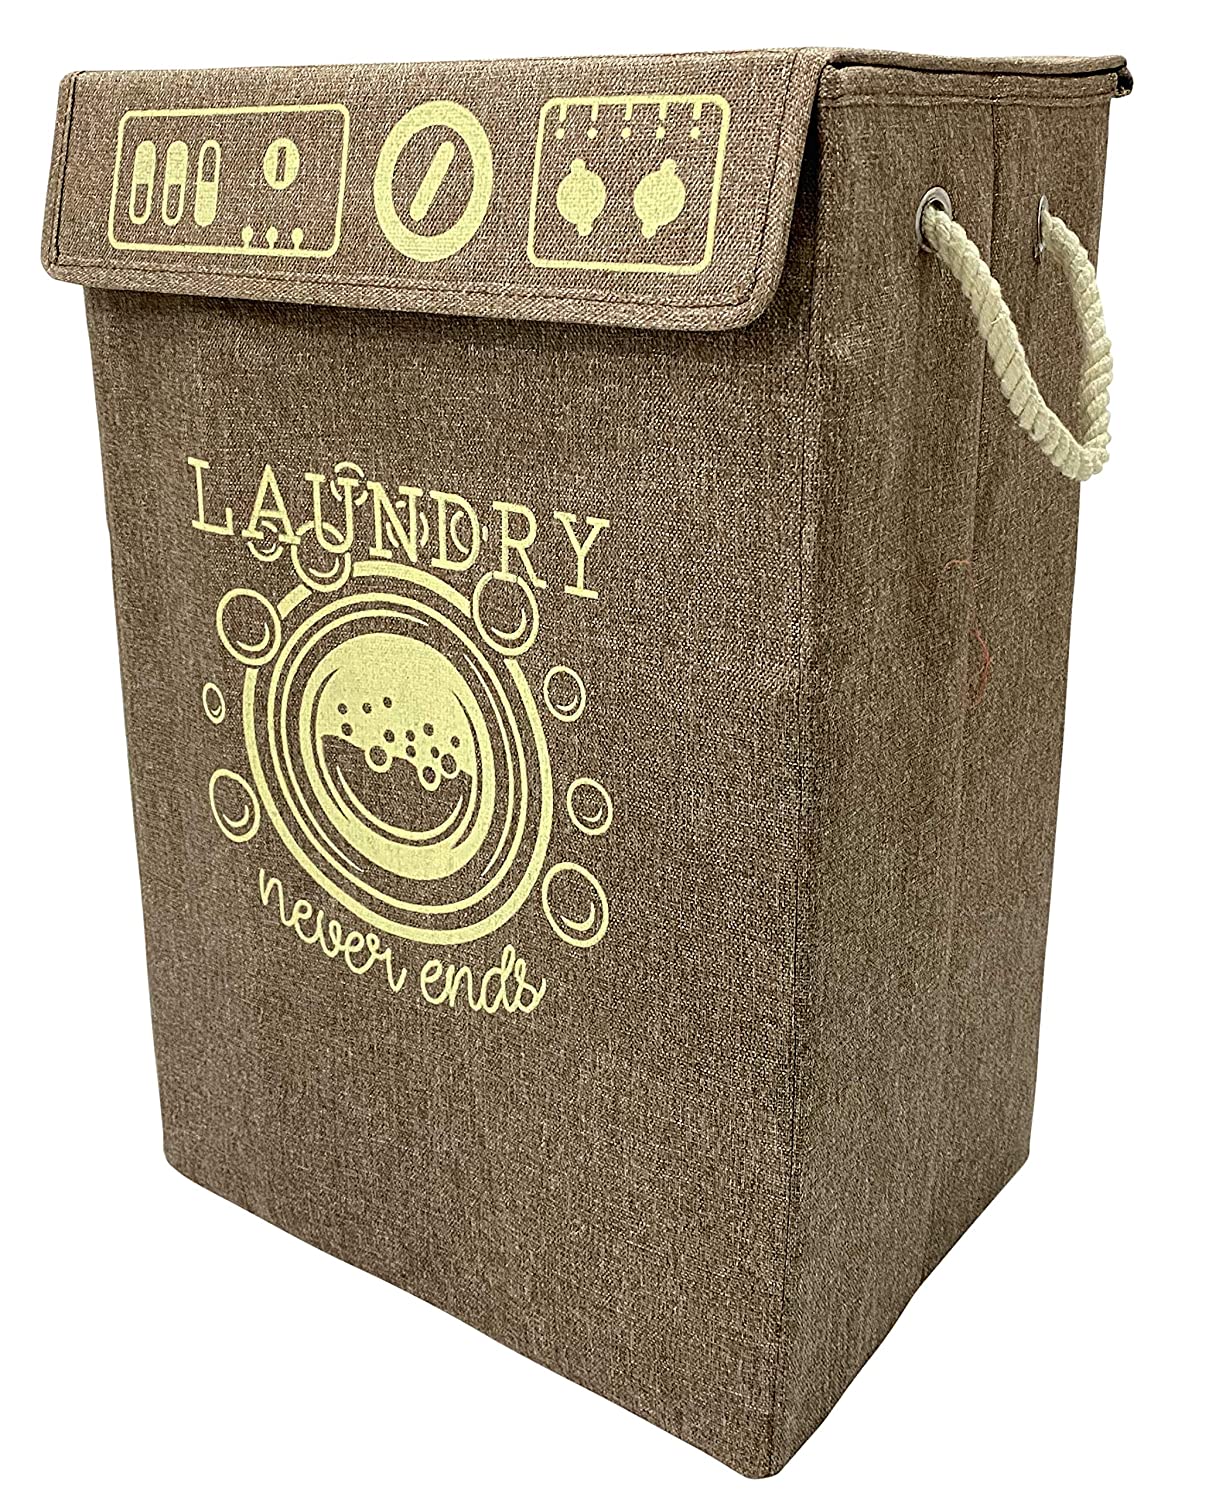 Brown-color-cloth-organizer-loomsmith-foldable-laundry-basket-with-lid-basket-bag-hard-cardboard-72-litres-capacity